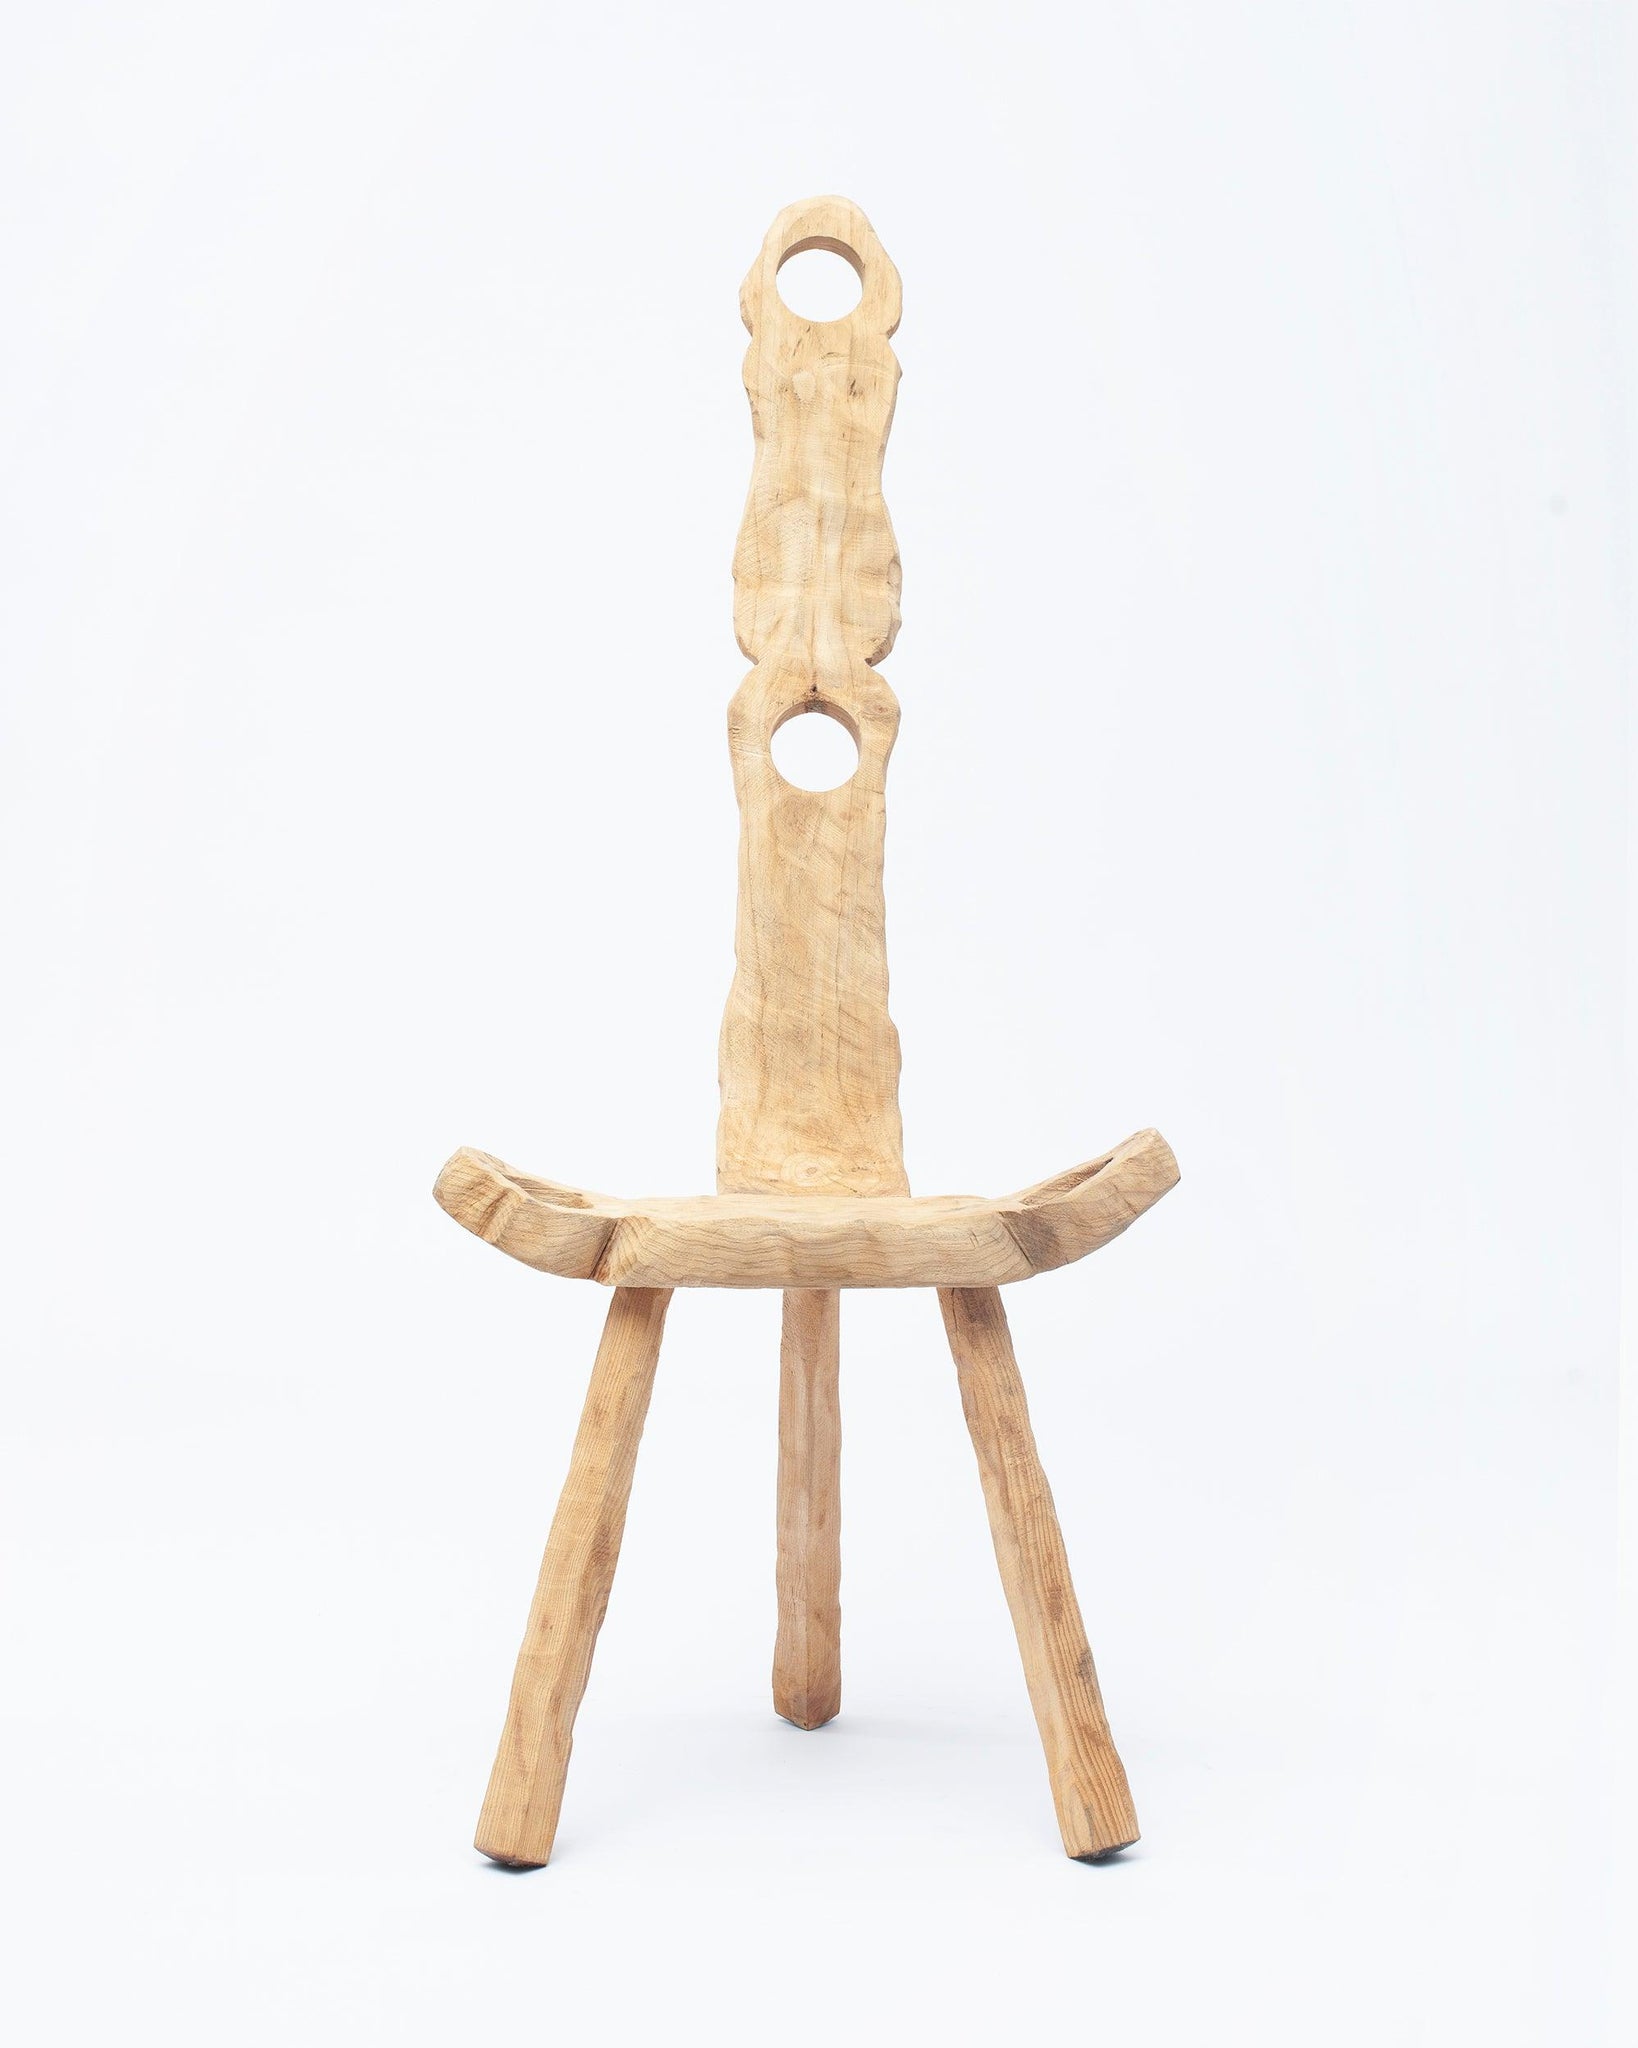 Hand-carved wooden collectible chair by NIKO JUNE with front view in white background